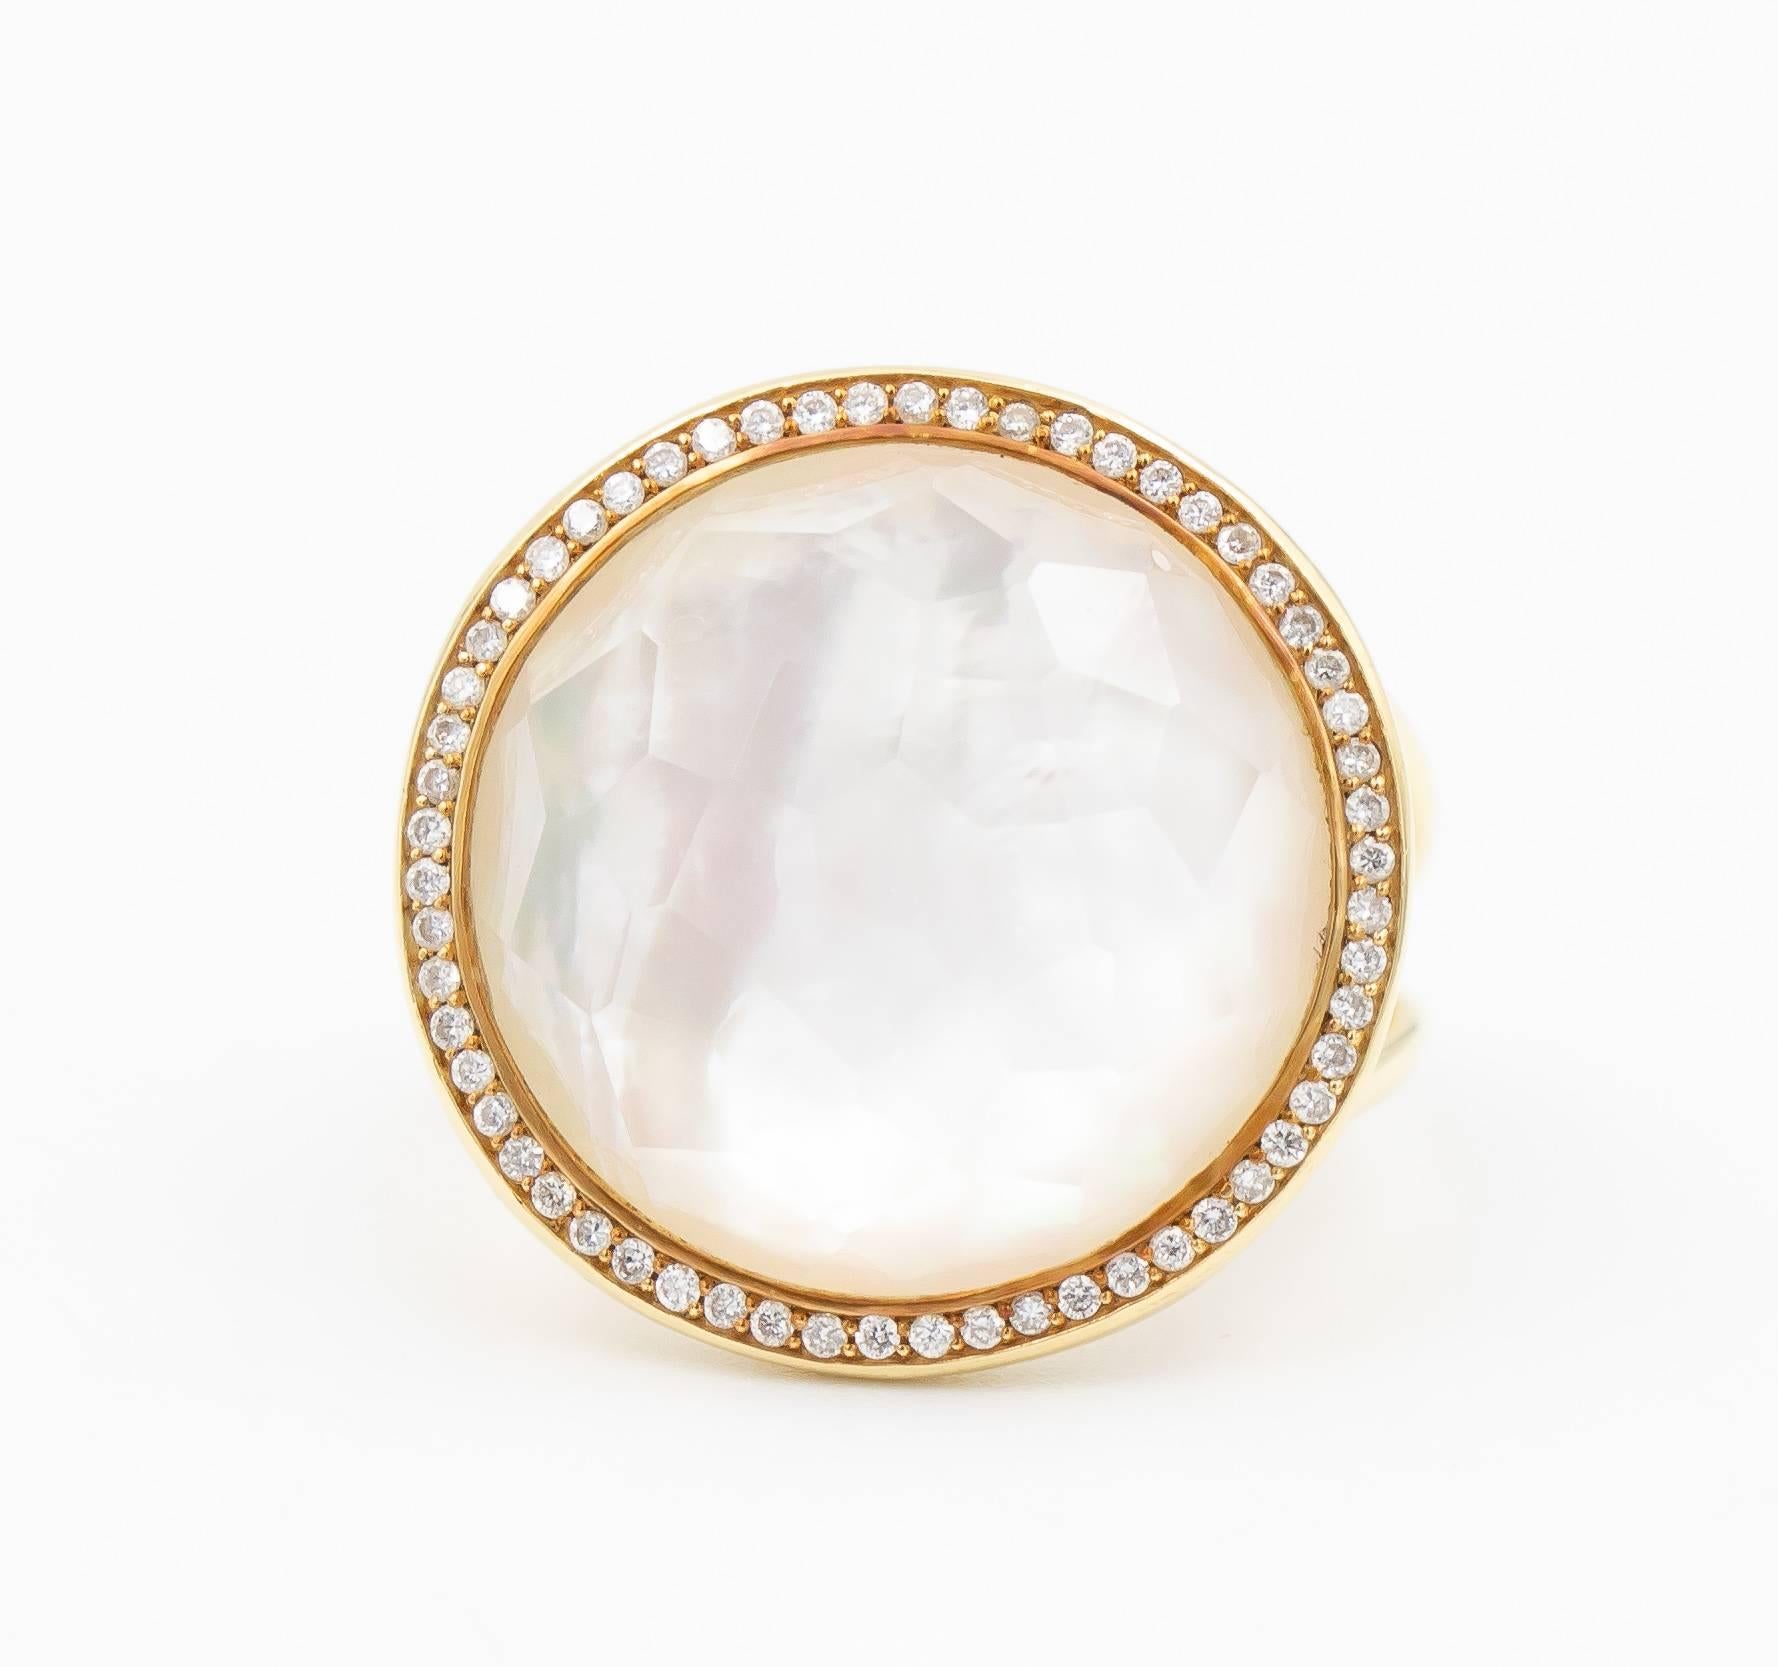 Round Cut Ippolita Lollipop Ring in 18 Karat Gold with Diamonds and Mother-of-Pearl